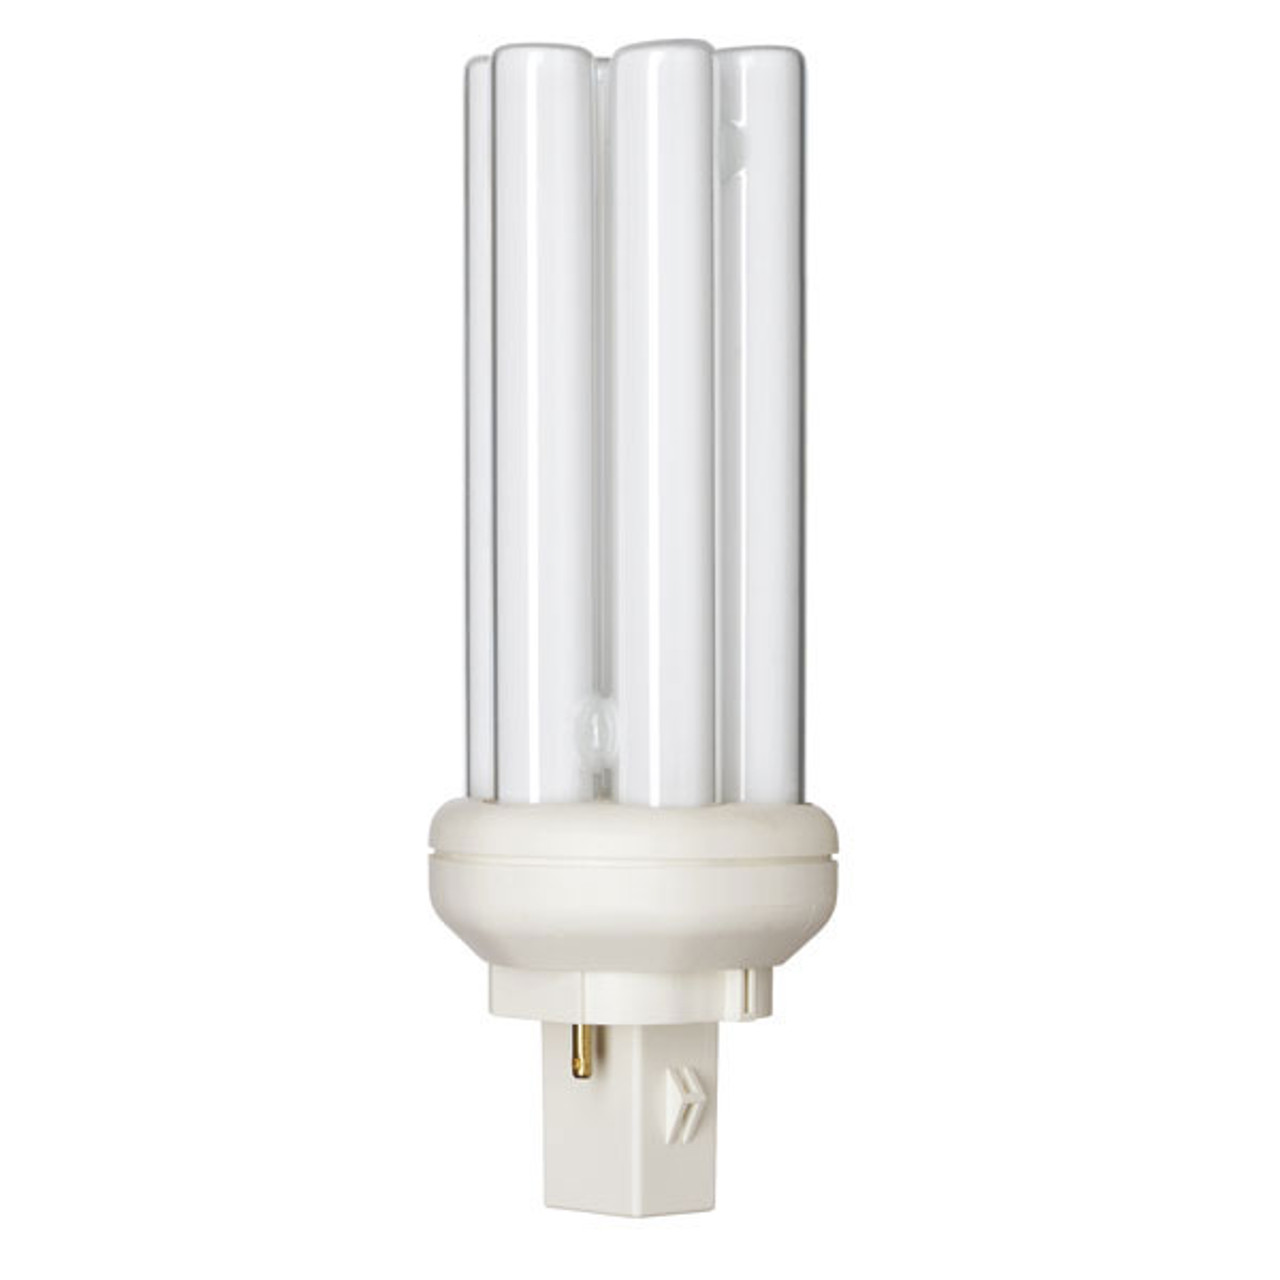 Philips PL-T 26W 2-Pin 827 Very Warm White